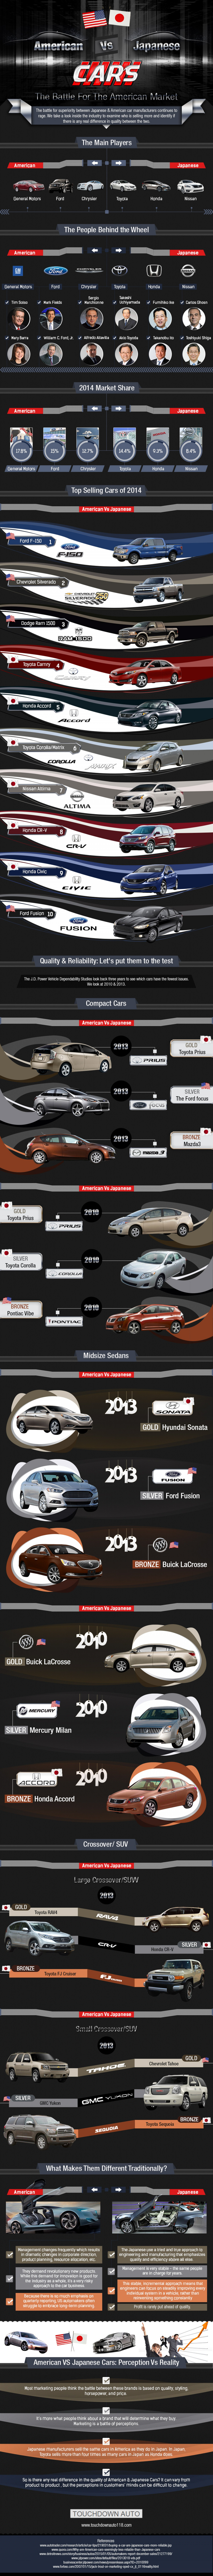 American vs Japanese Cars: The Battle For the American Market